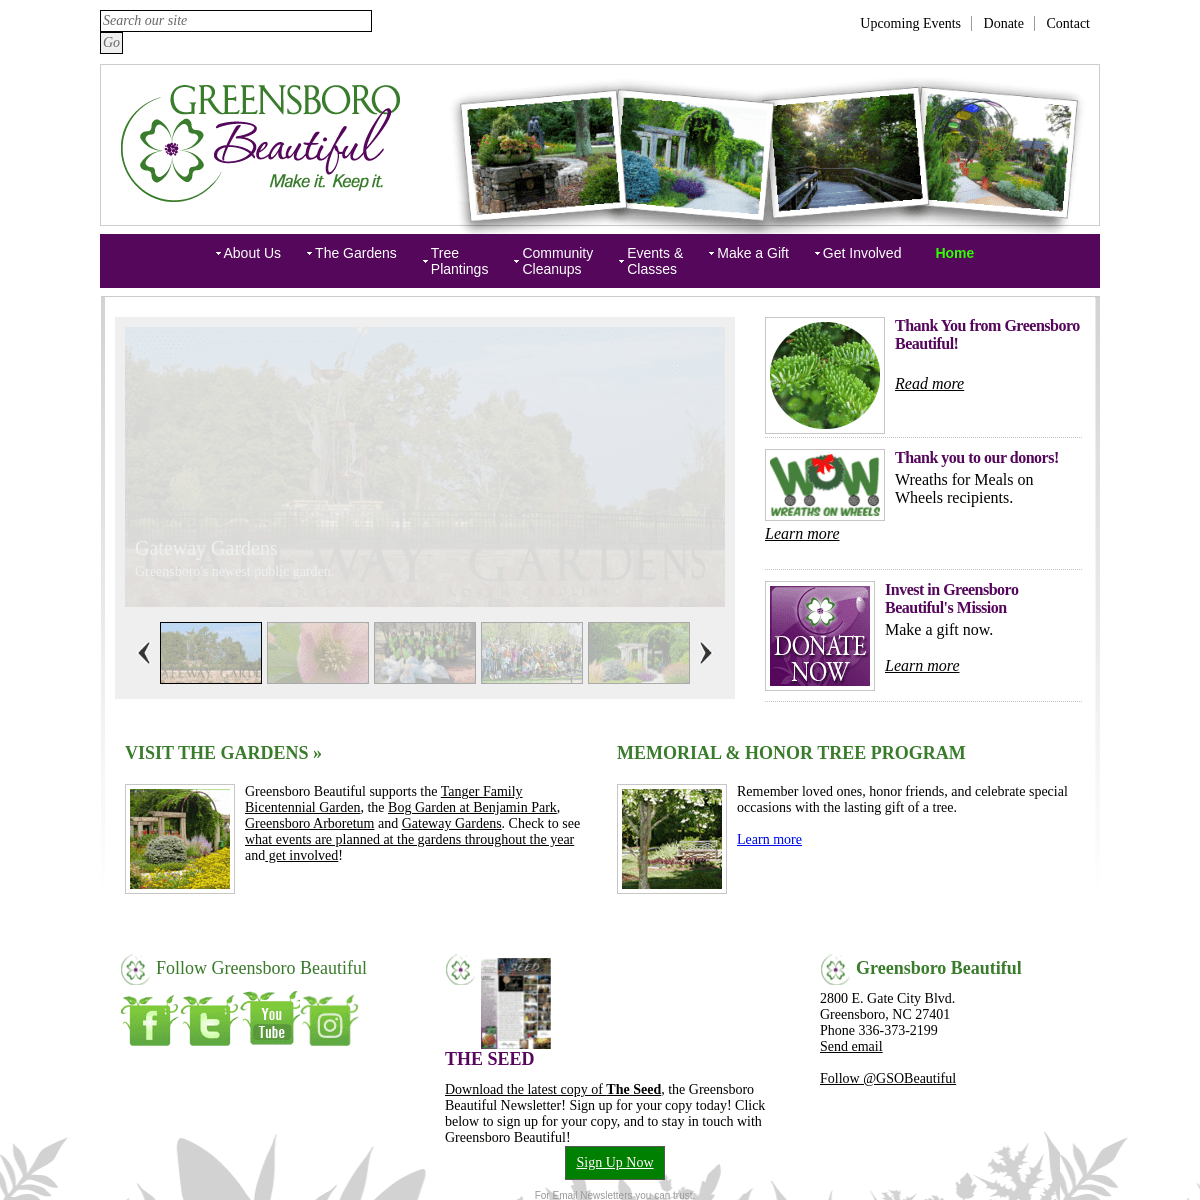 A complete backup of https://greensborobeautiful.org